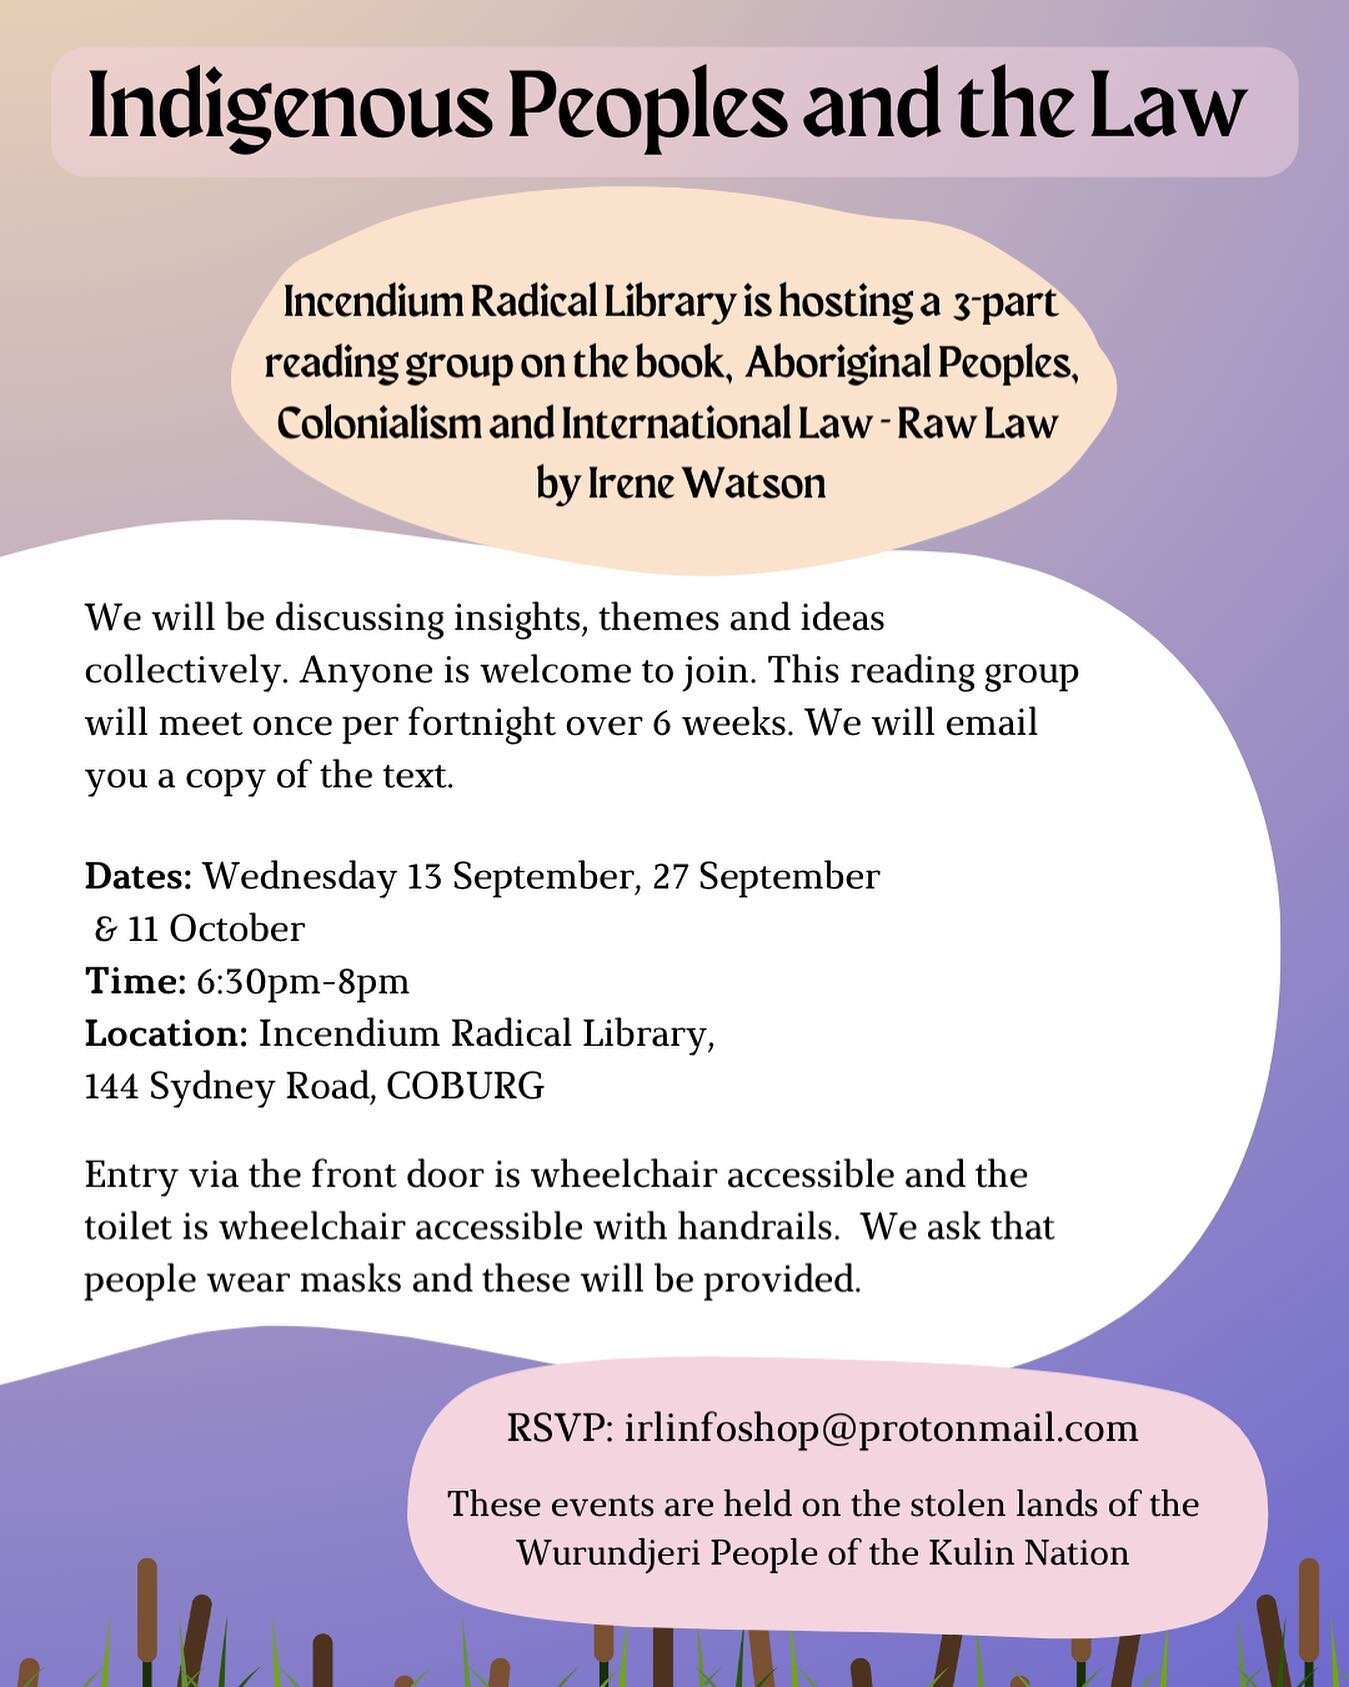 Indigenous Peoples and the Law 

Incendium Radical Library is hosting a 3-part reading group on the book, Aboriginal Peoples, Colonialism and International Law - Raw Law by Irene Watson. 

We will be discussing insights, themes and ideas collectively